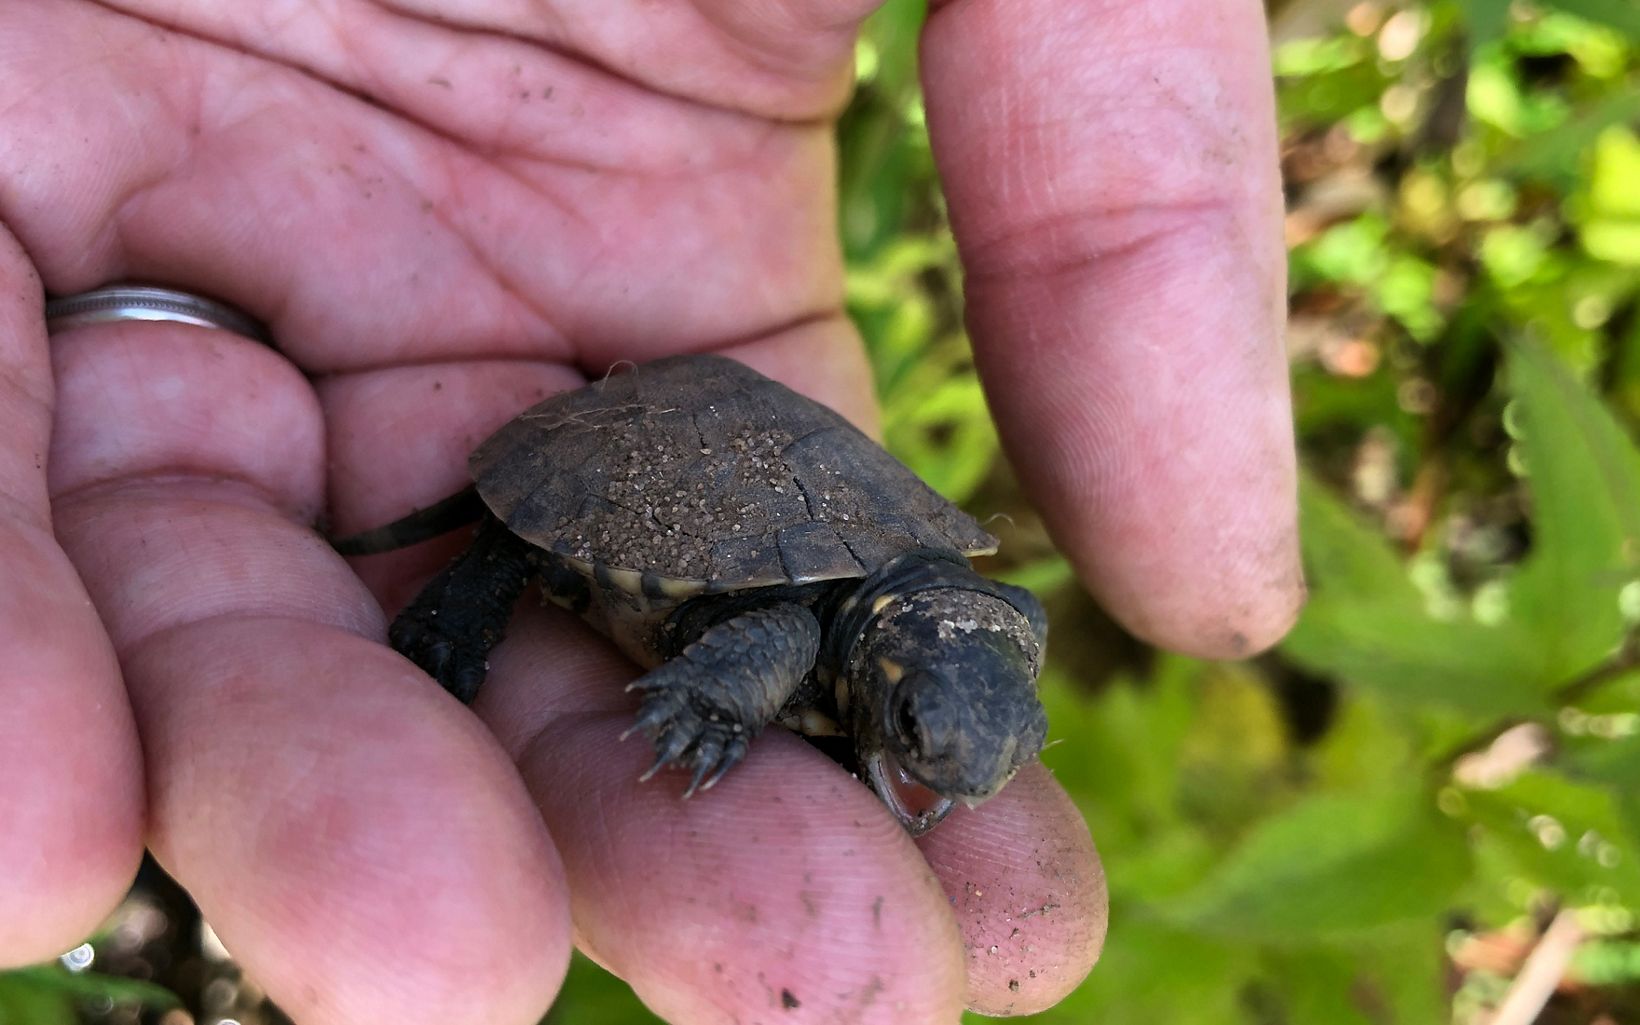 Blanding’s Turtle Hatchling Blanding’s turtles need a diversity of connected habitats from wetlands to dry sandy uplands to survive and thrive. © Stephanie Judge/TNC